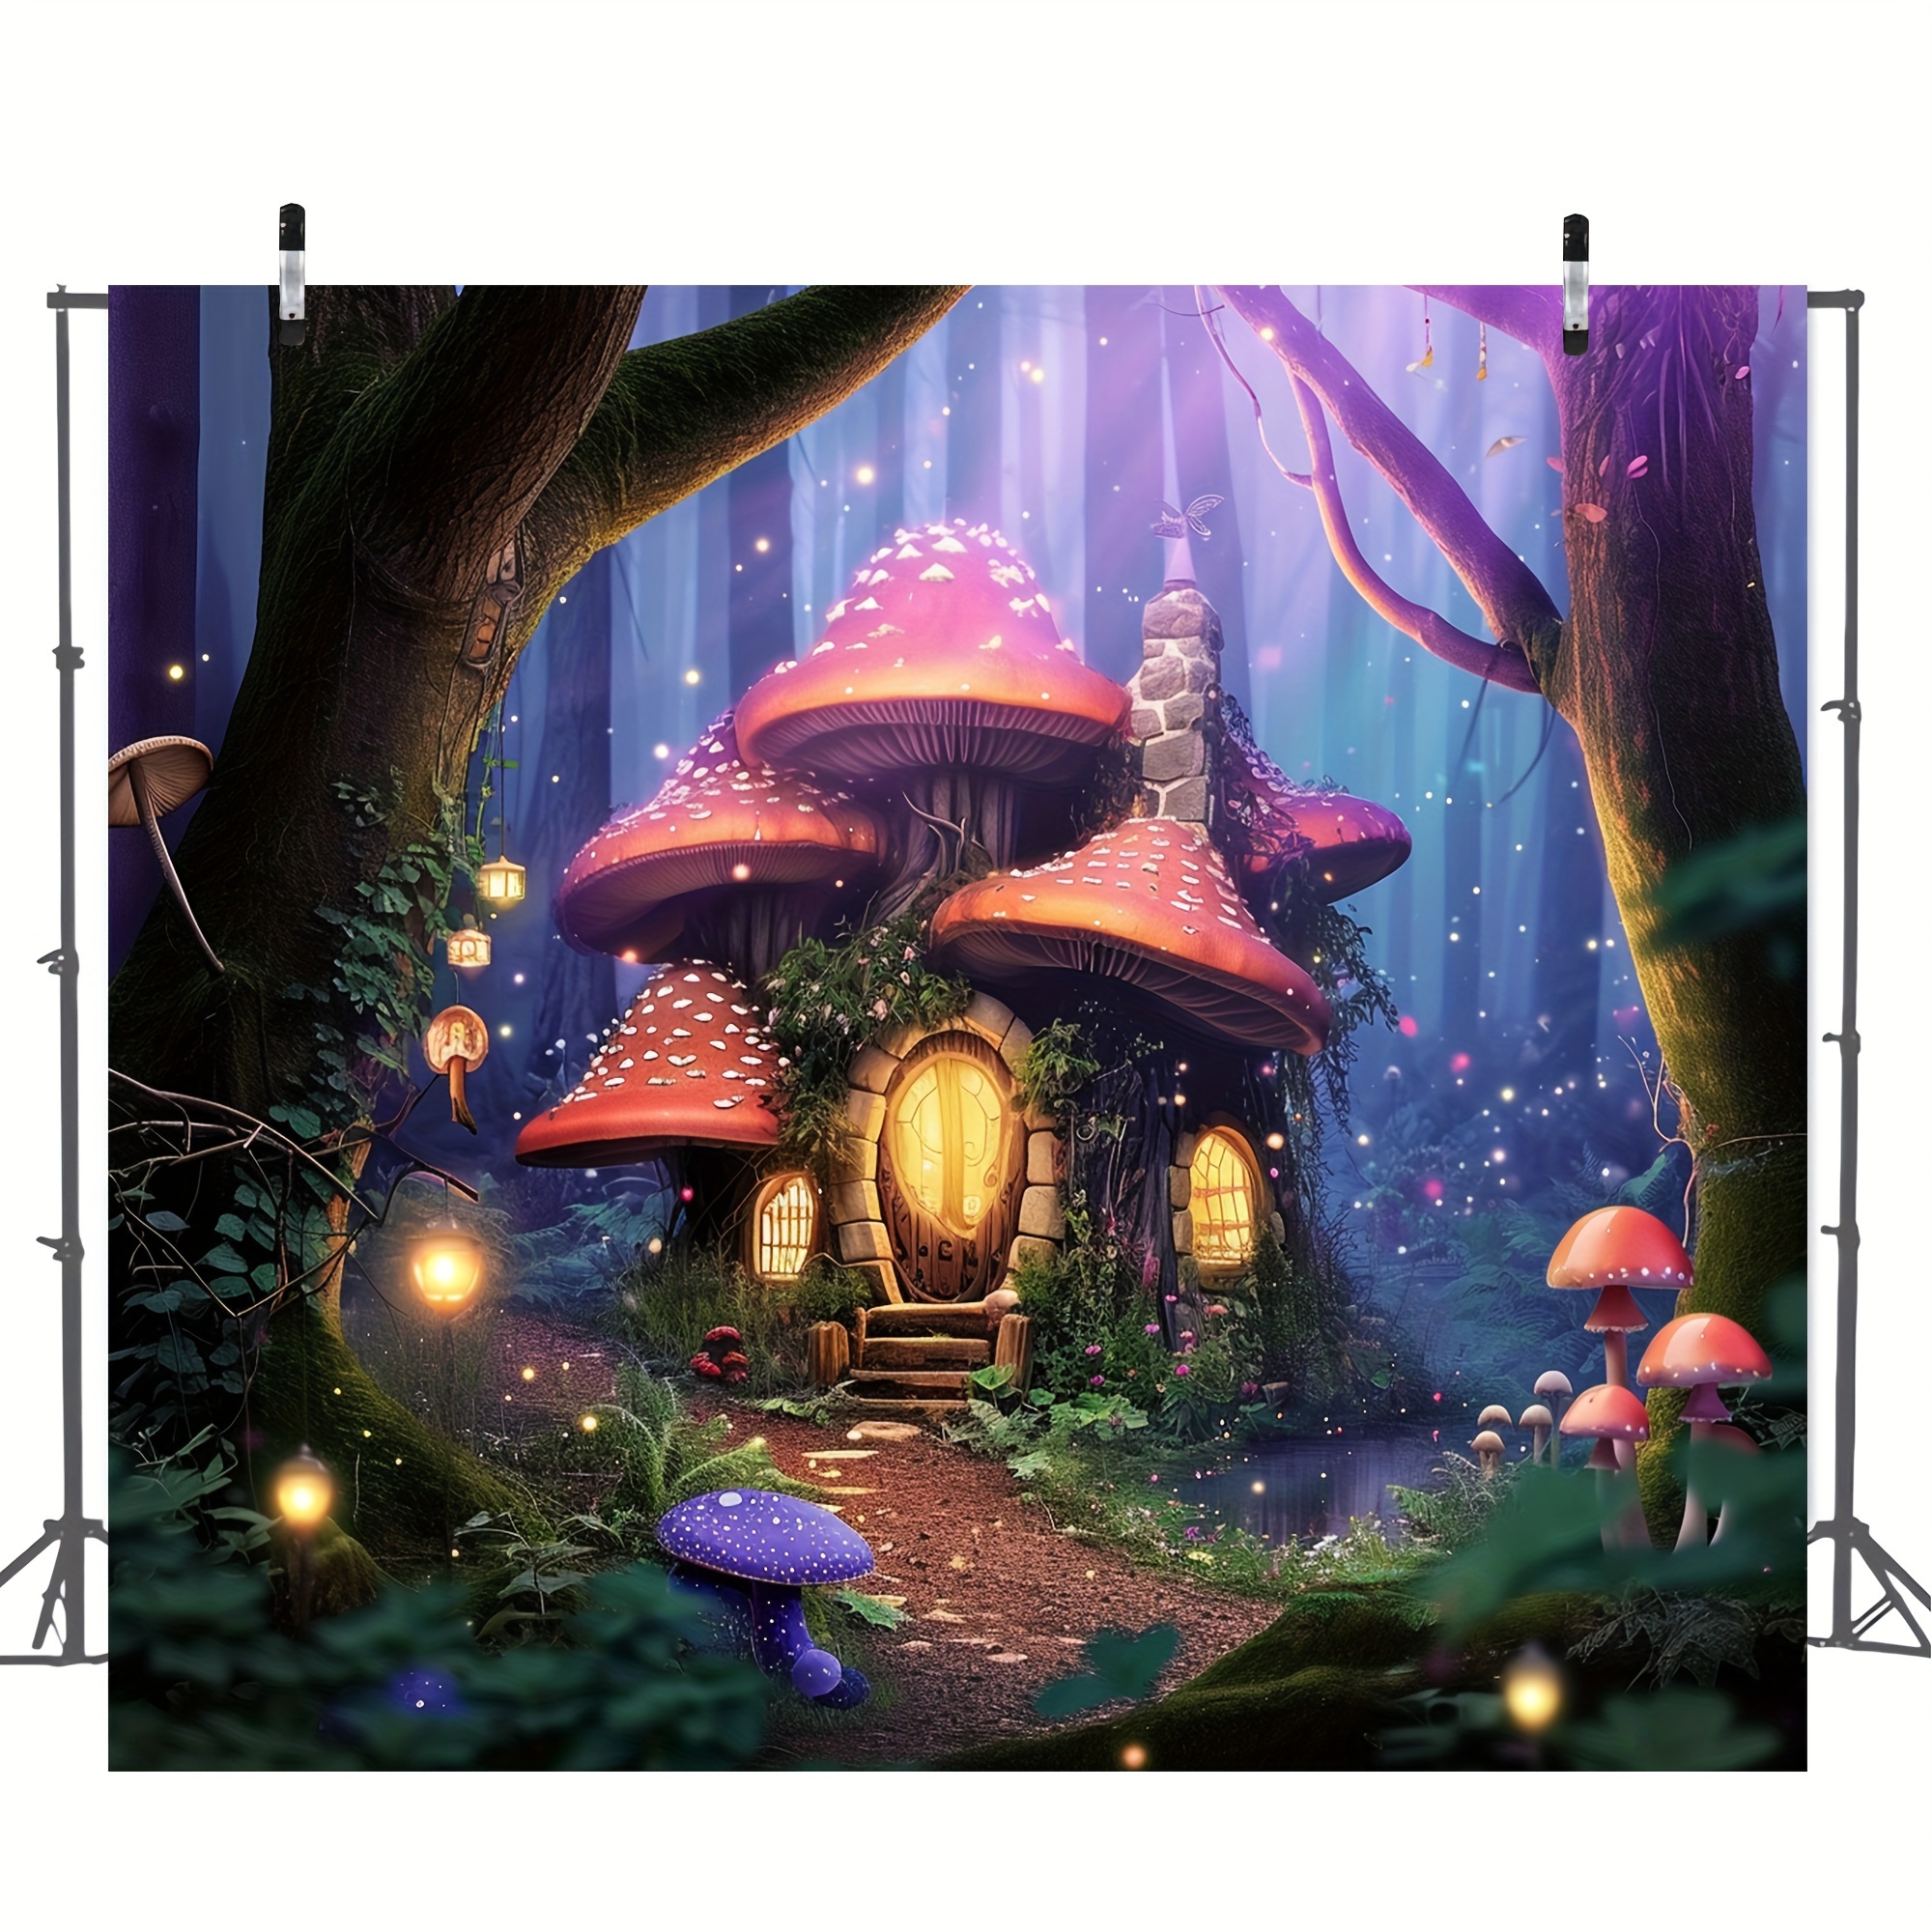 1pc cartoon mushroom backdrop spring enchanted forest backdrops birthday party decorations easter supplies wonderland fantasy party supplies birthday supplies mothers day supplies holiday supplies decor